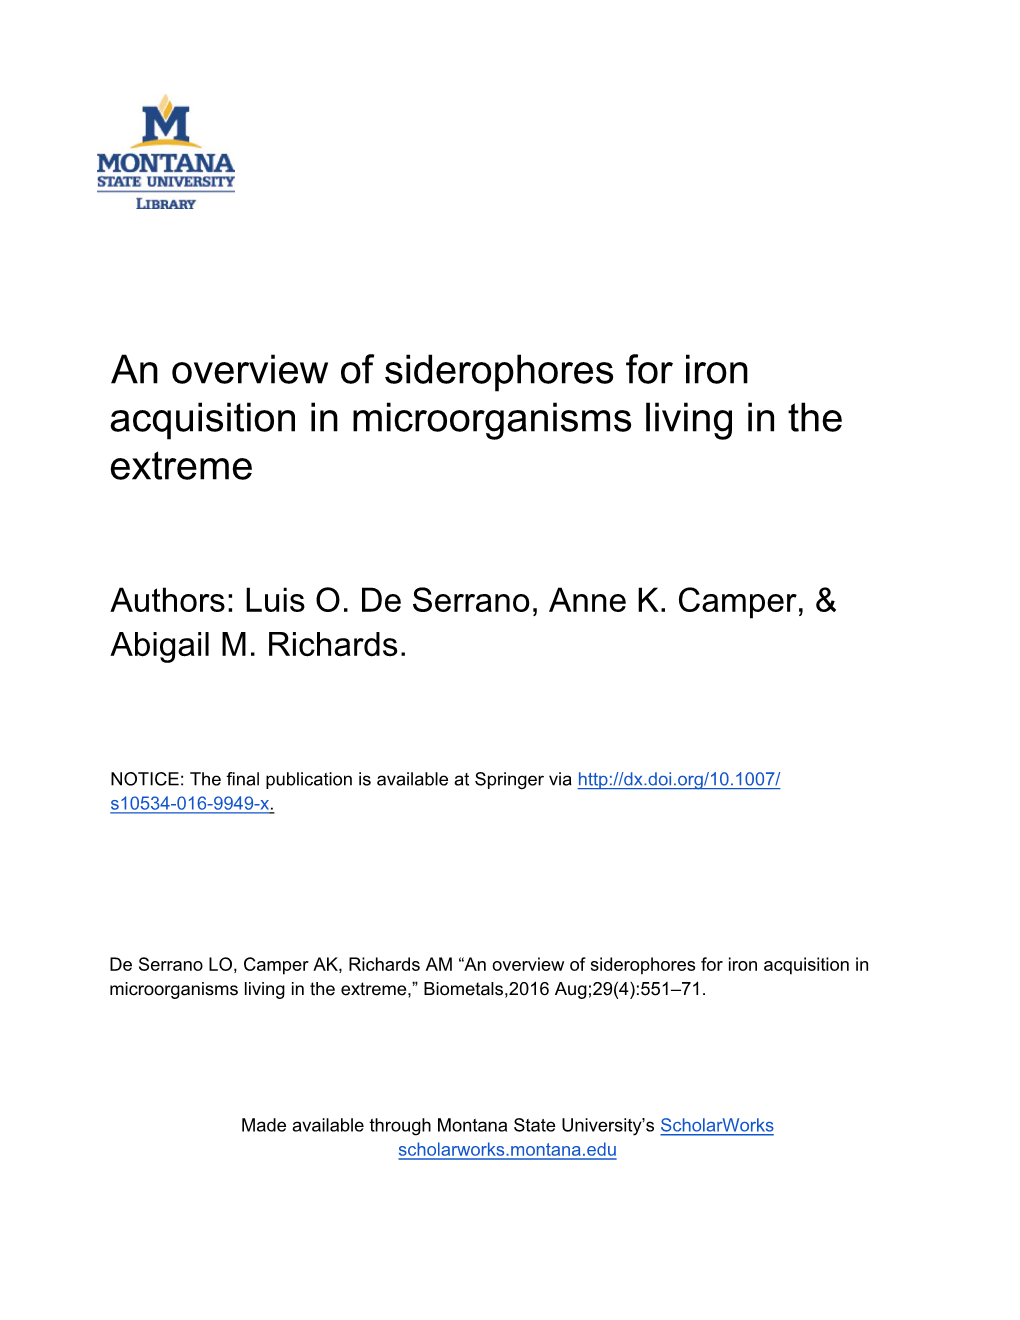 An Overview of Siderophores for Iron Acquisition in Microorganisms Living in the Extreme